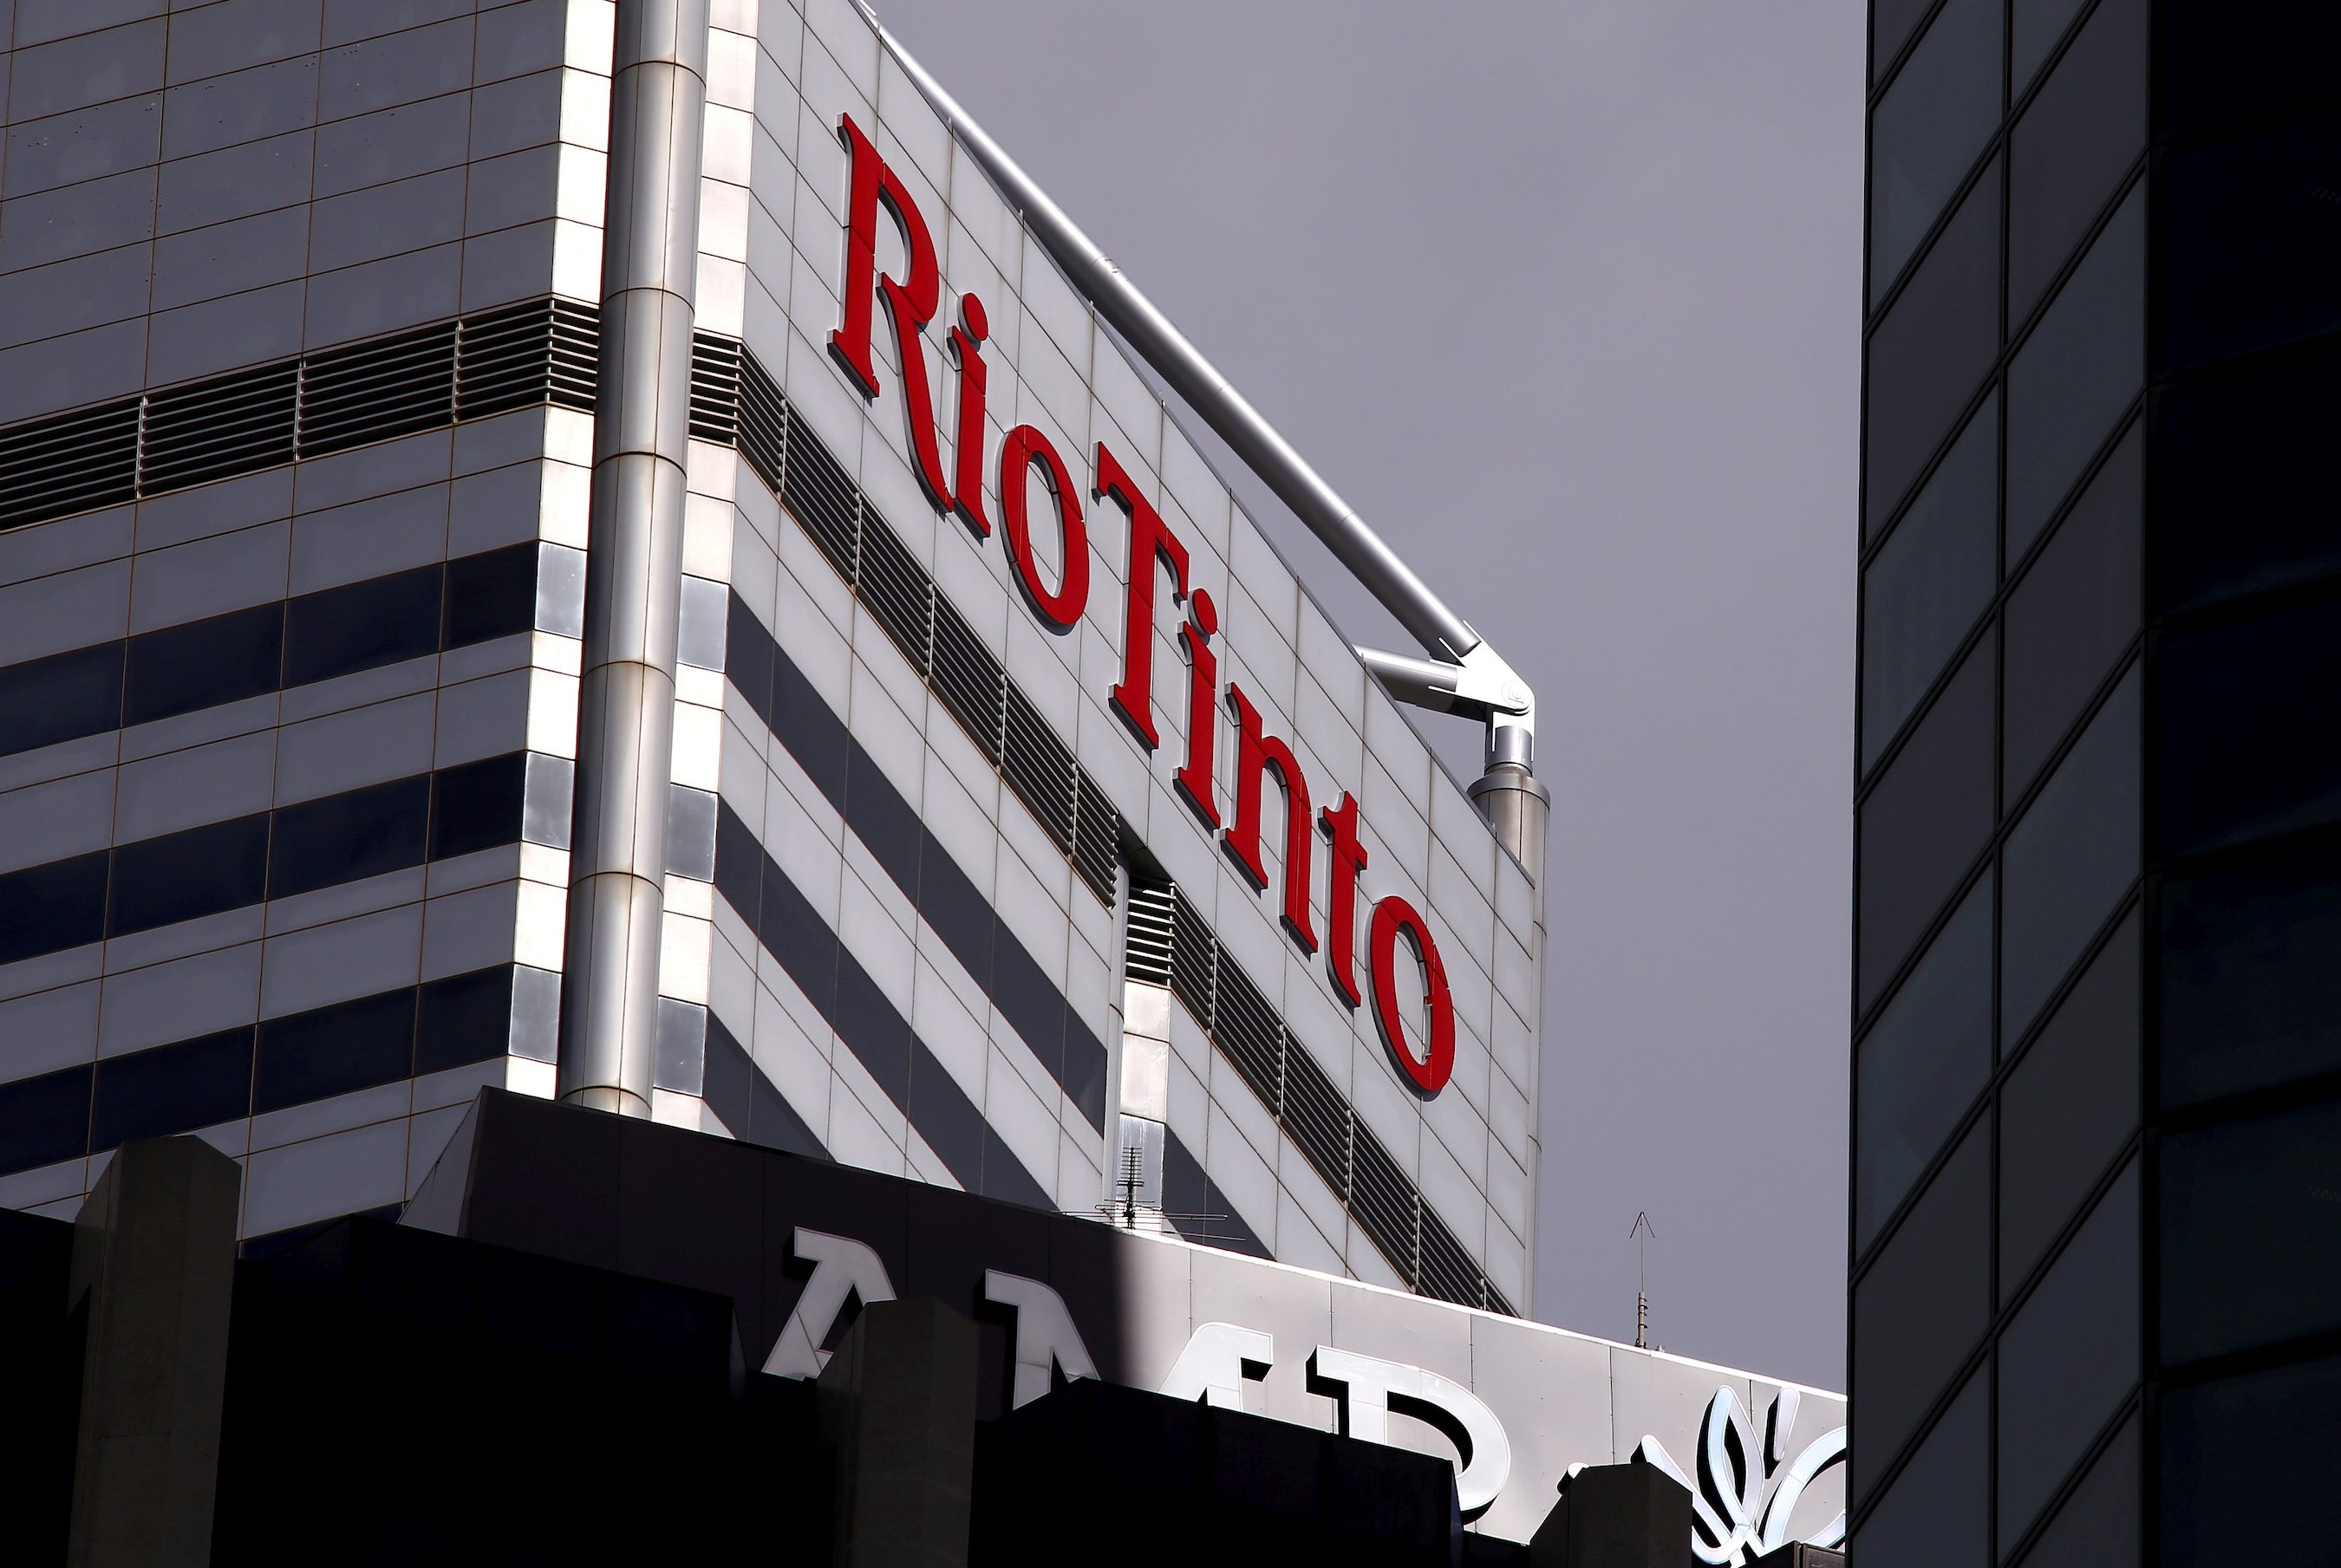 South Africa urges Rio Tinto workers to report cases of discrimination